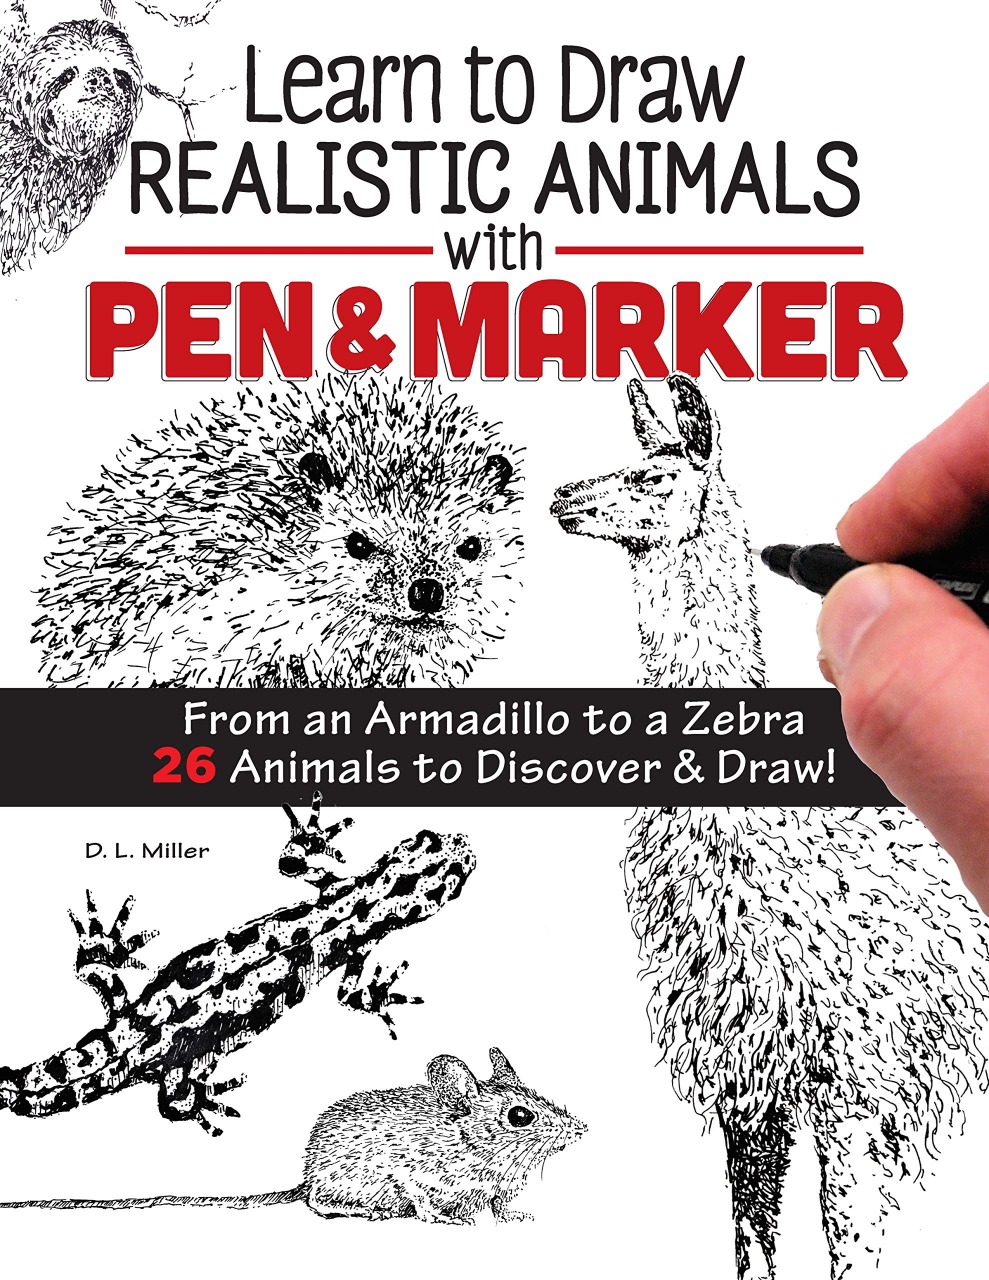 Learn to Draw Realistic Animals with Pen & Marker, ISBN: 9781497204782 -  available from Nationwide Book Distributors Ltd NZ.